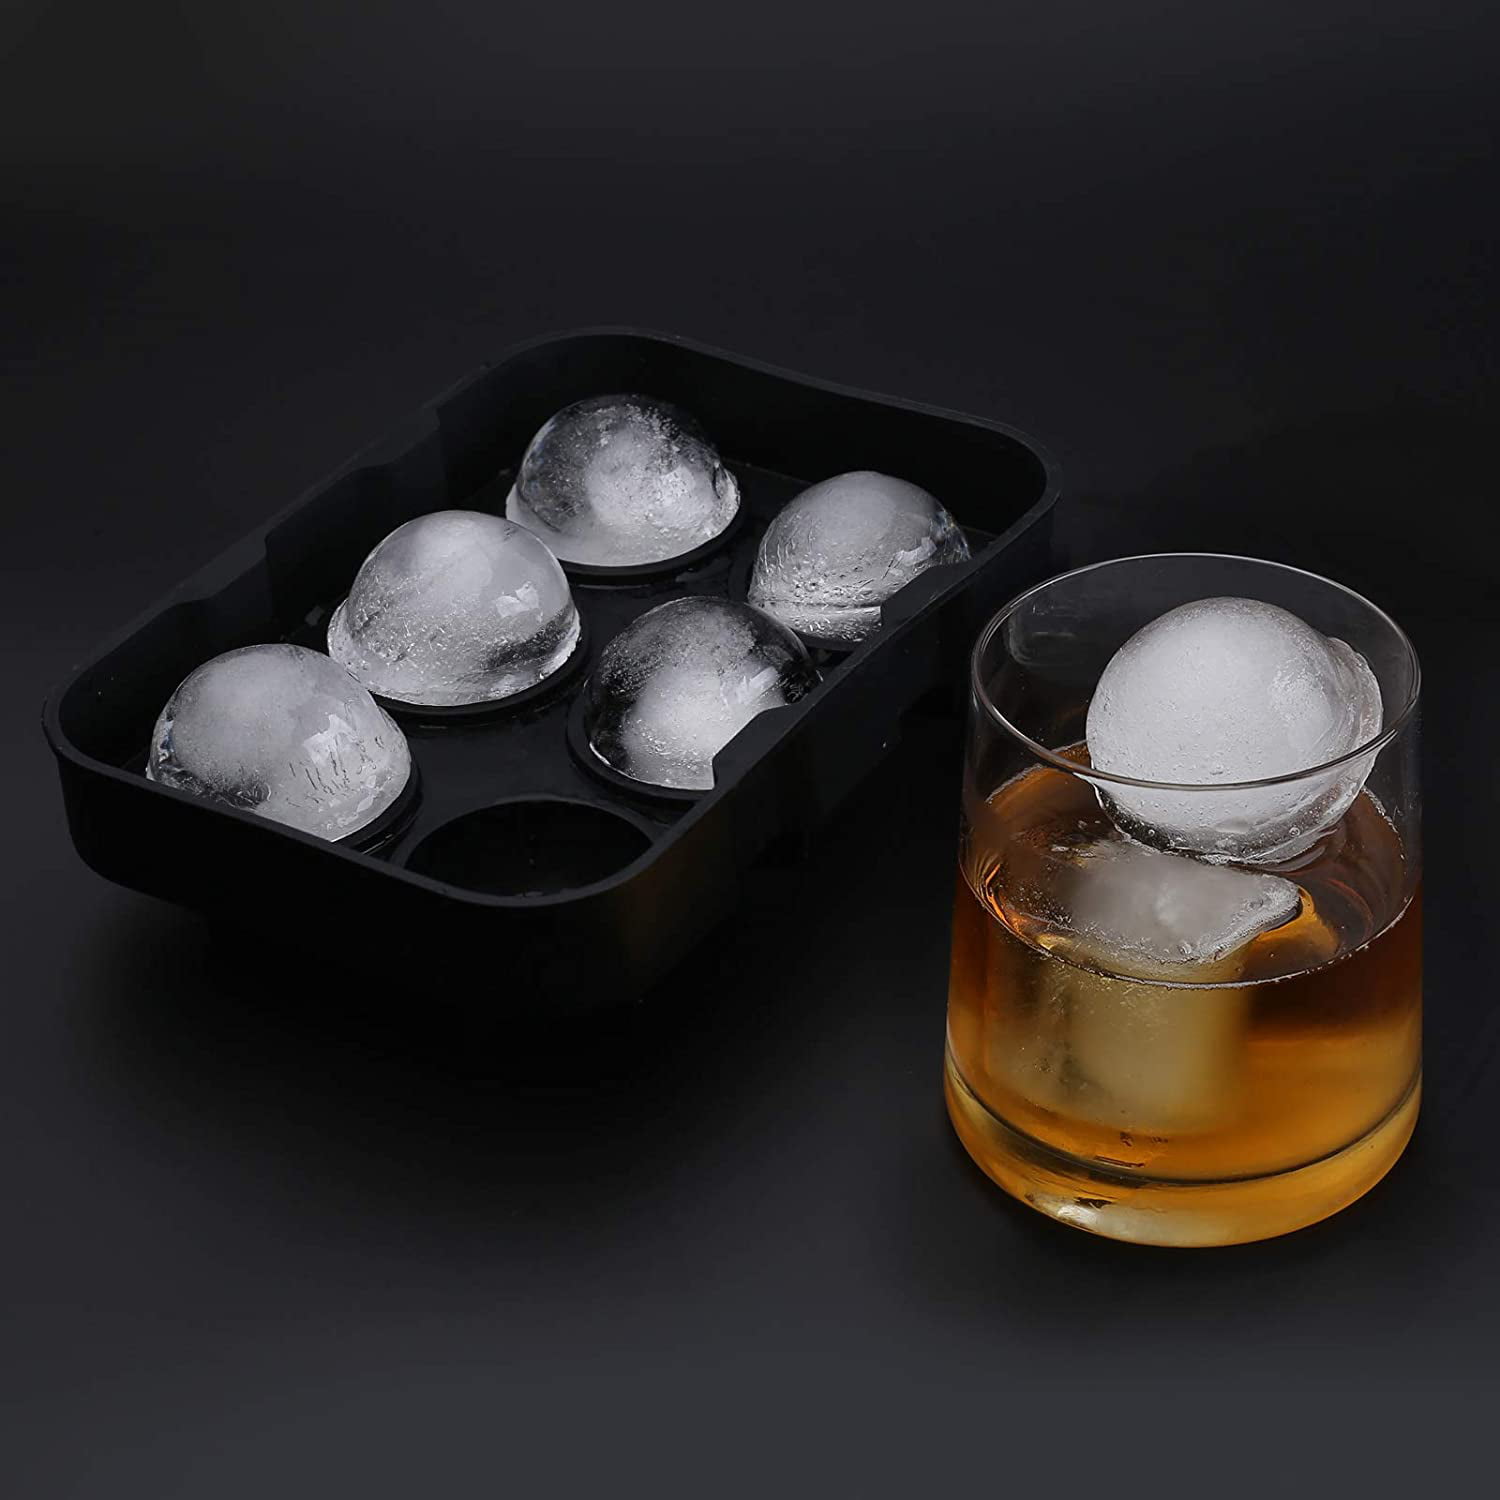 ITWIST Large Ice Cube Tray, 2''Whiskey Ice Mold with Bin & Tong, Square Ice  Cube Mold Making 10Pcs Ice Cubes for Cocktails Whiskey Bourbon Scotch-Easy